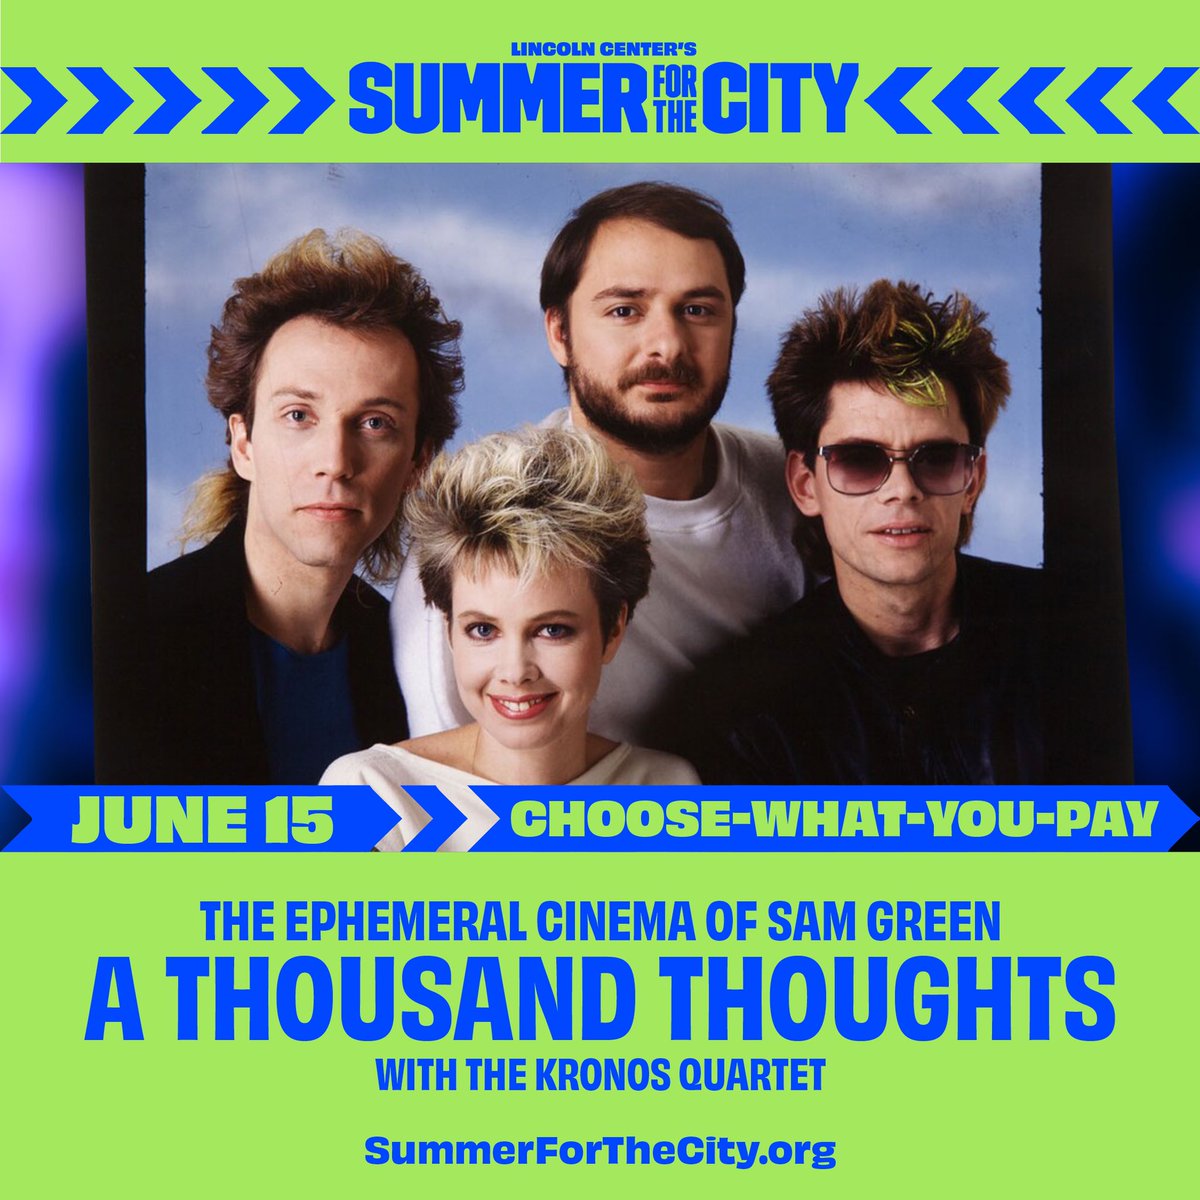 Tickets for @lincolncenter’s upcoming “Summer for the City” season go on sale tomorrow at noon EST! On June 15, we'll perform @sam_b_green's Live Documentary “A Thousand Thoughts” at Alice Tully Hall.